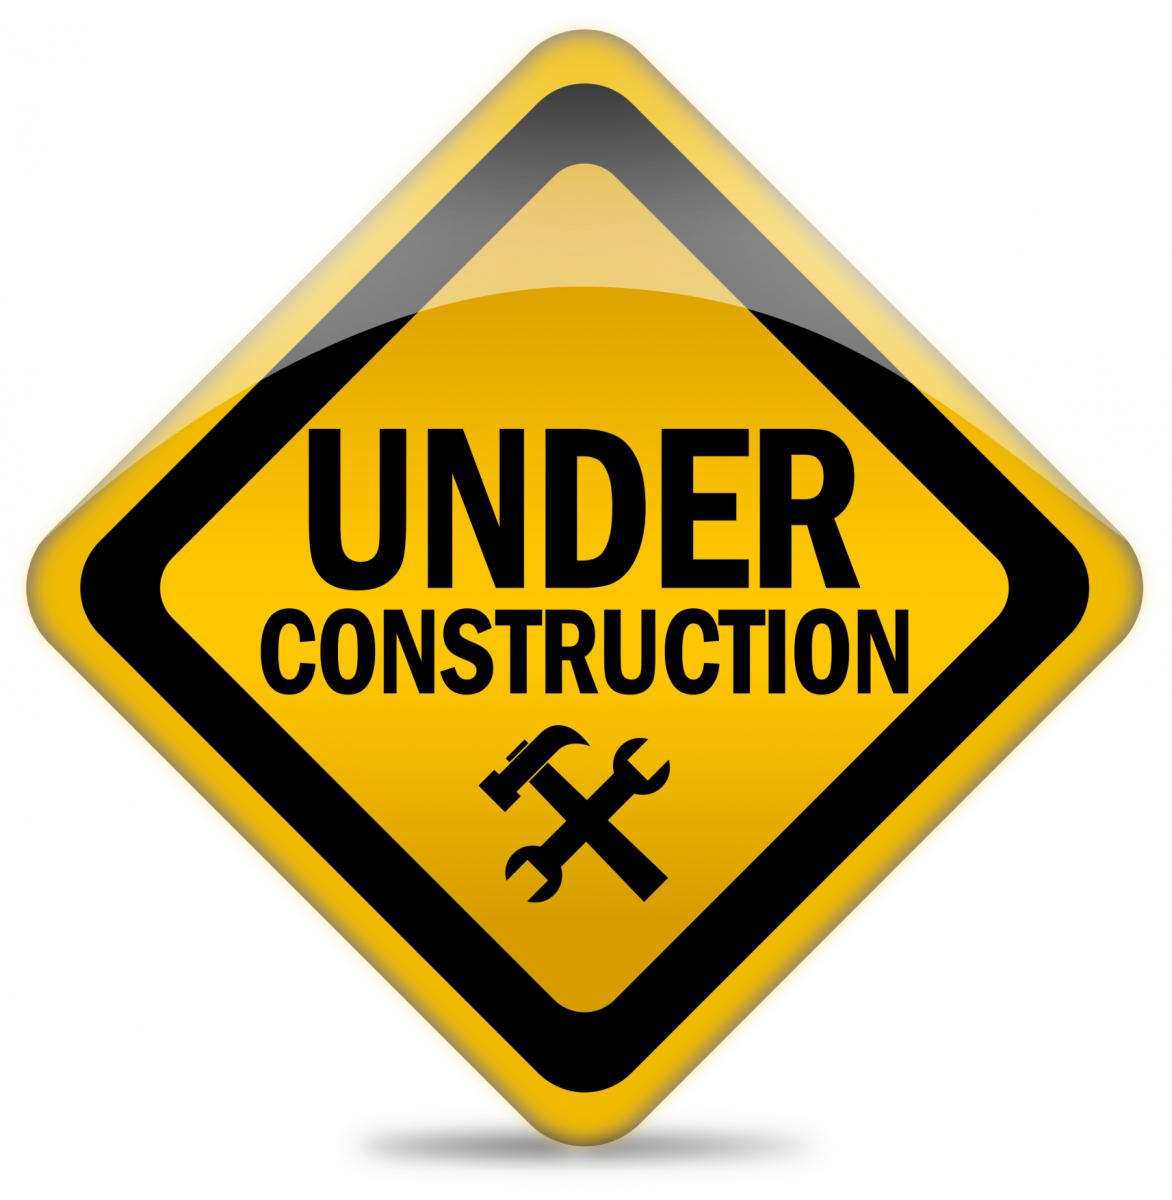 An image of a road sign that says under construction.